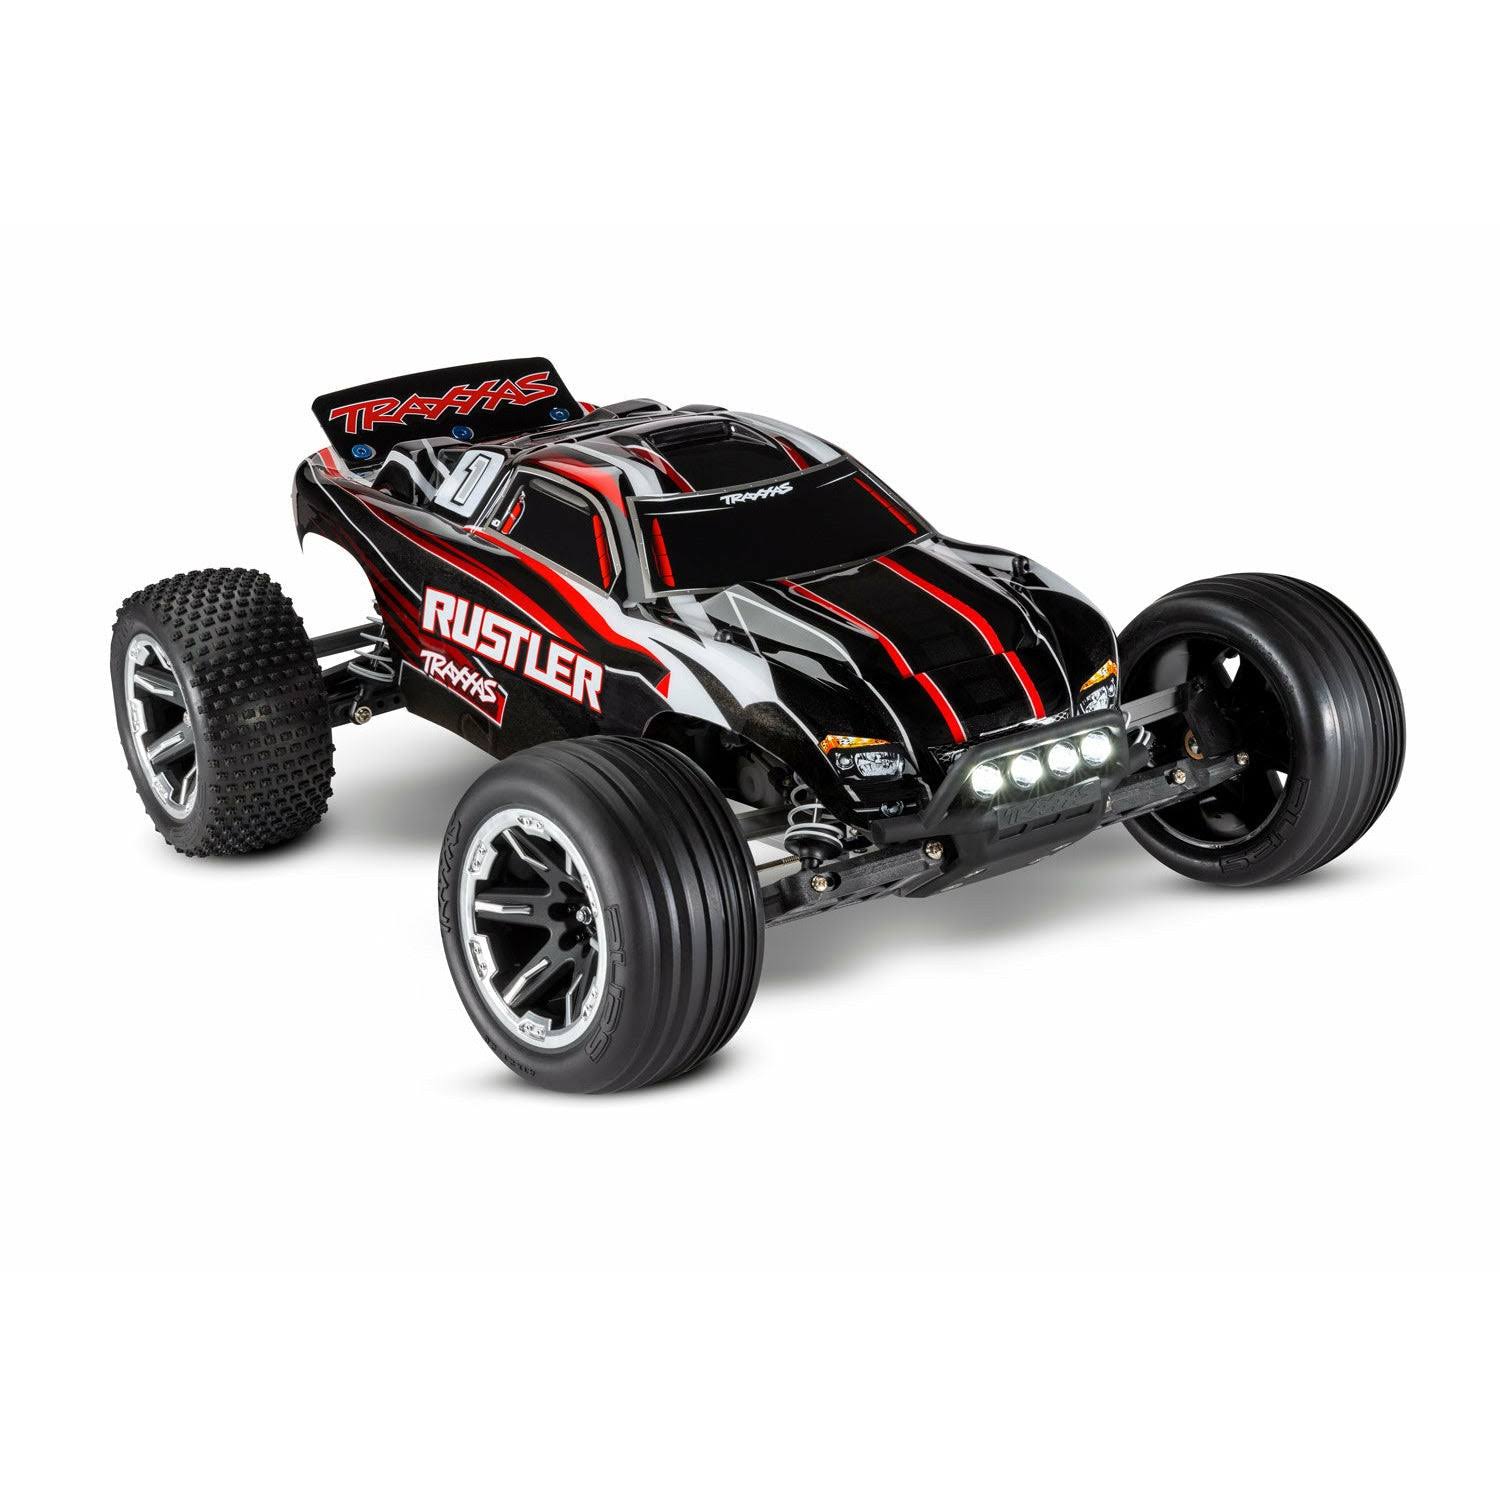 Traxxas Rustler 1/10 RTR with LED Lights, Battery and charger. Black